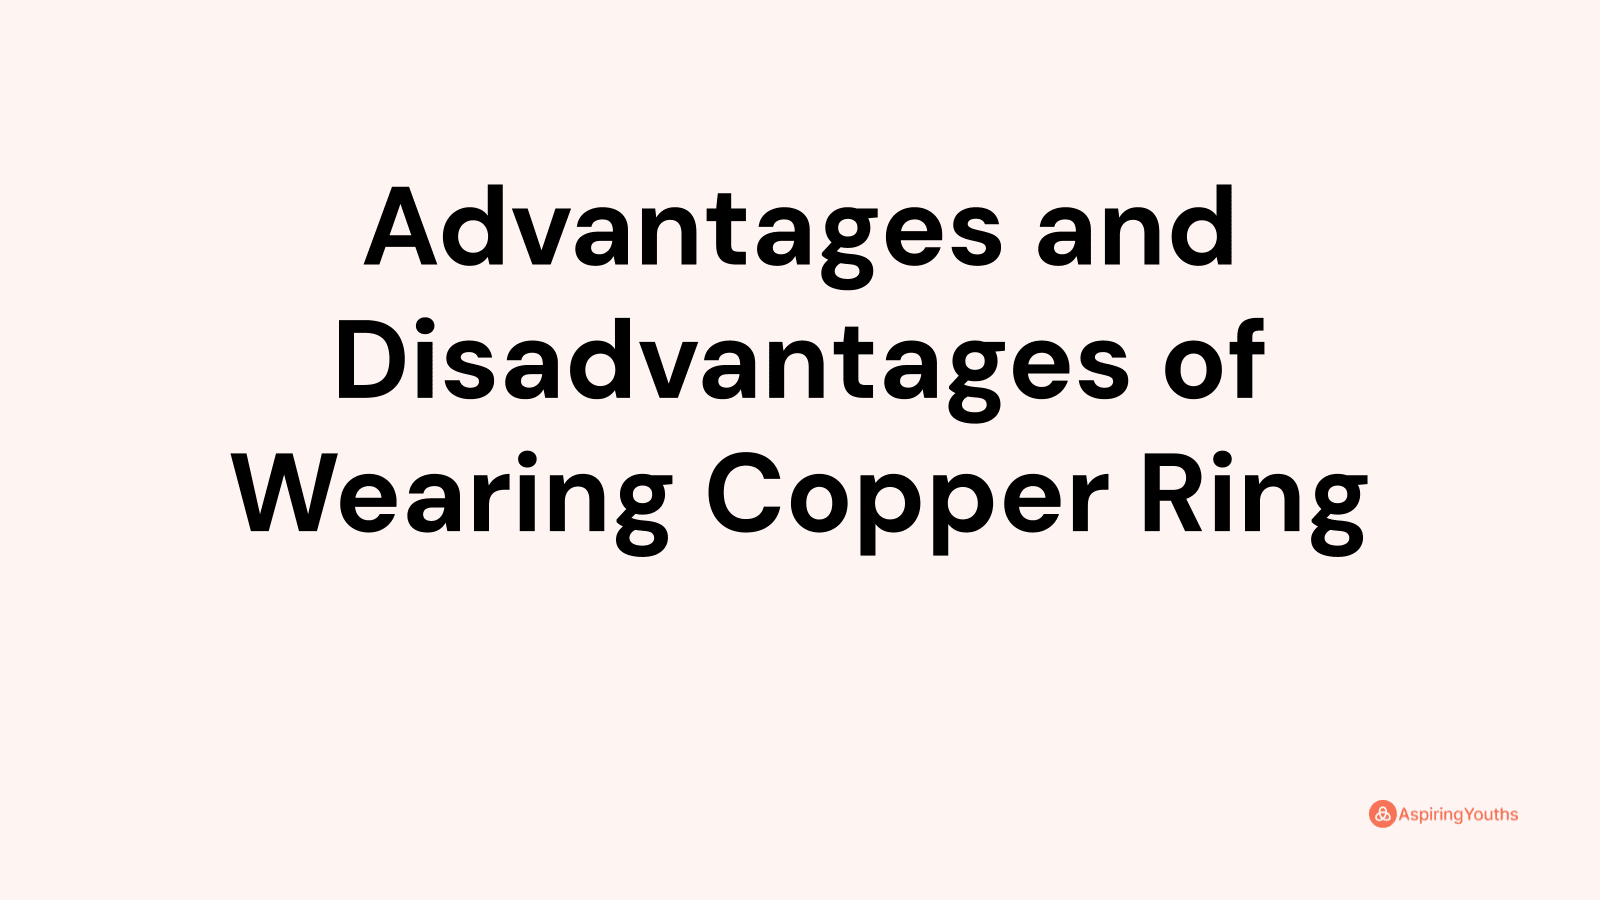 Advantages and disadvantages of Wearing Copper Ring